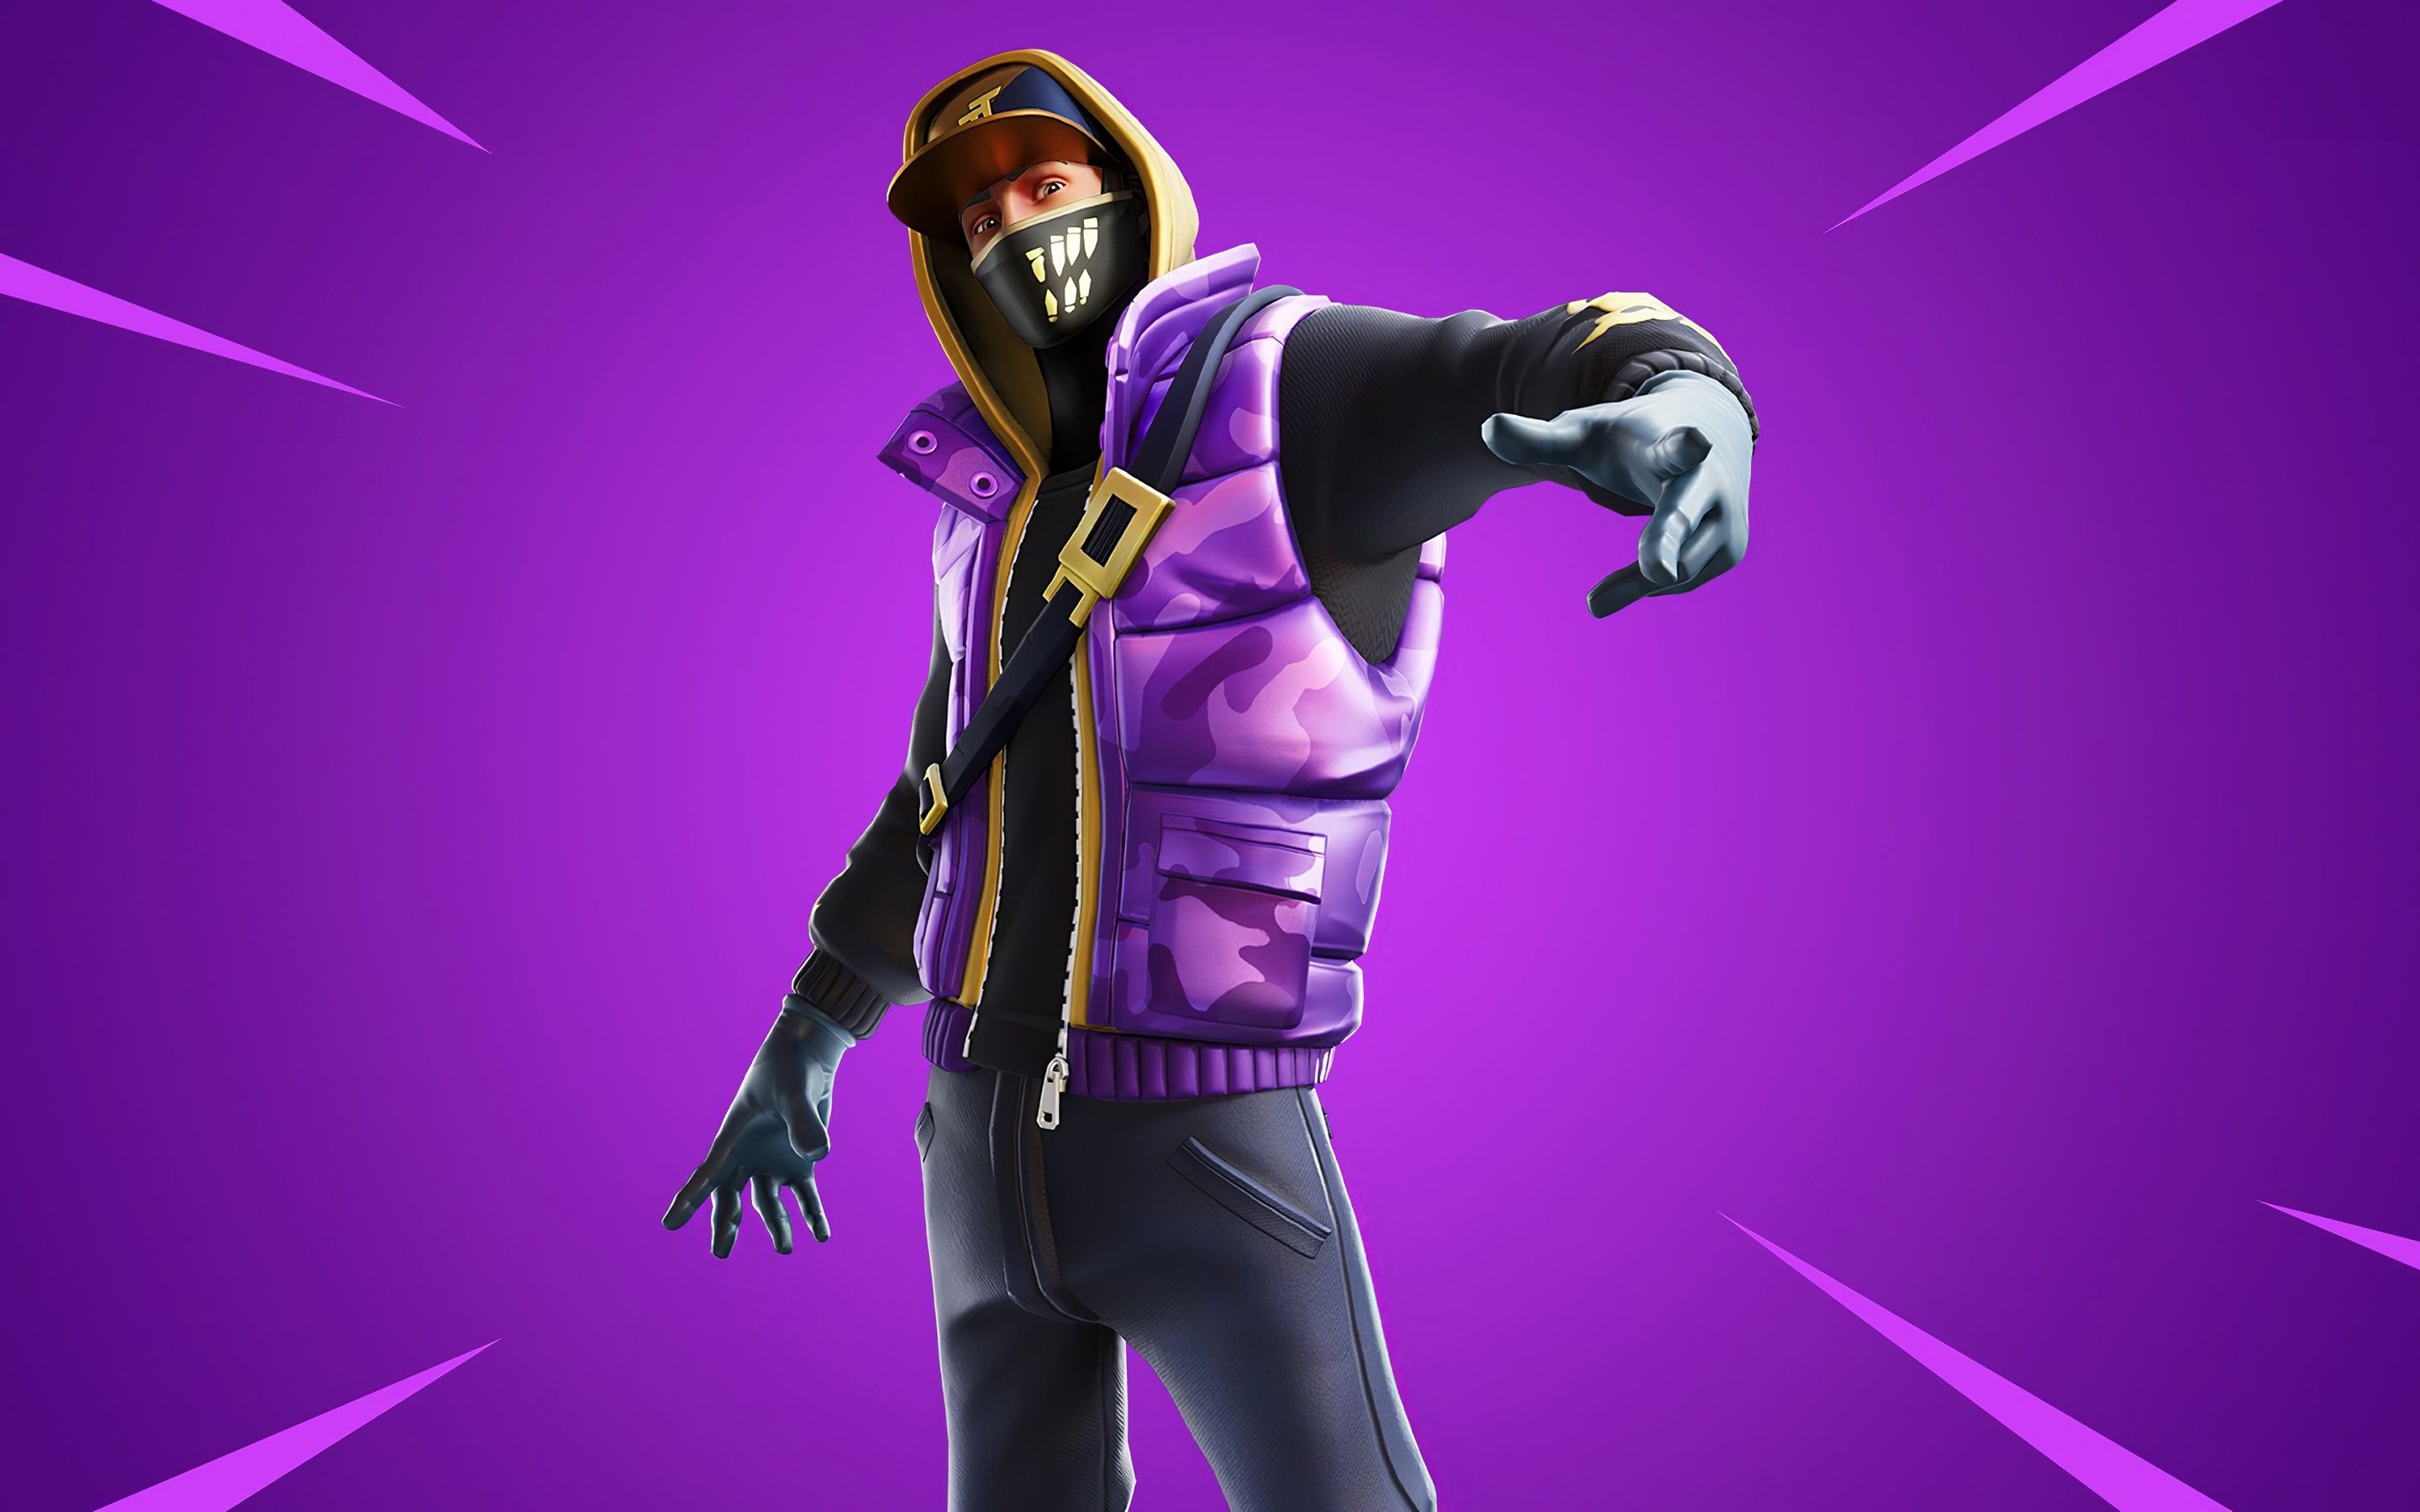 A Fortnite character wearing a purple jacket and a black mask with white teeth - Fortnite